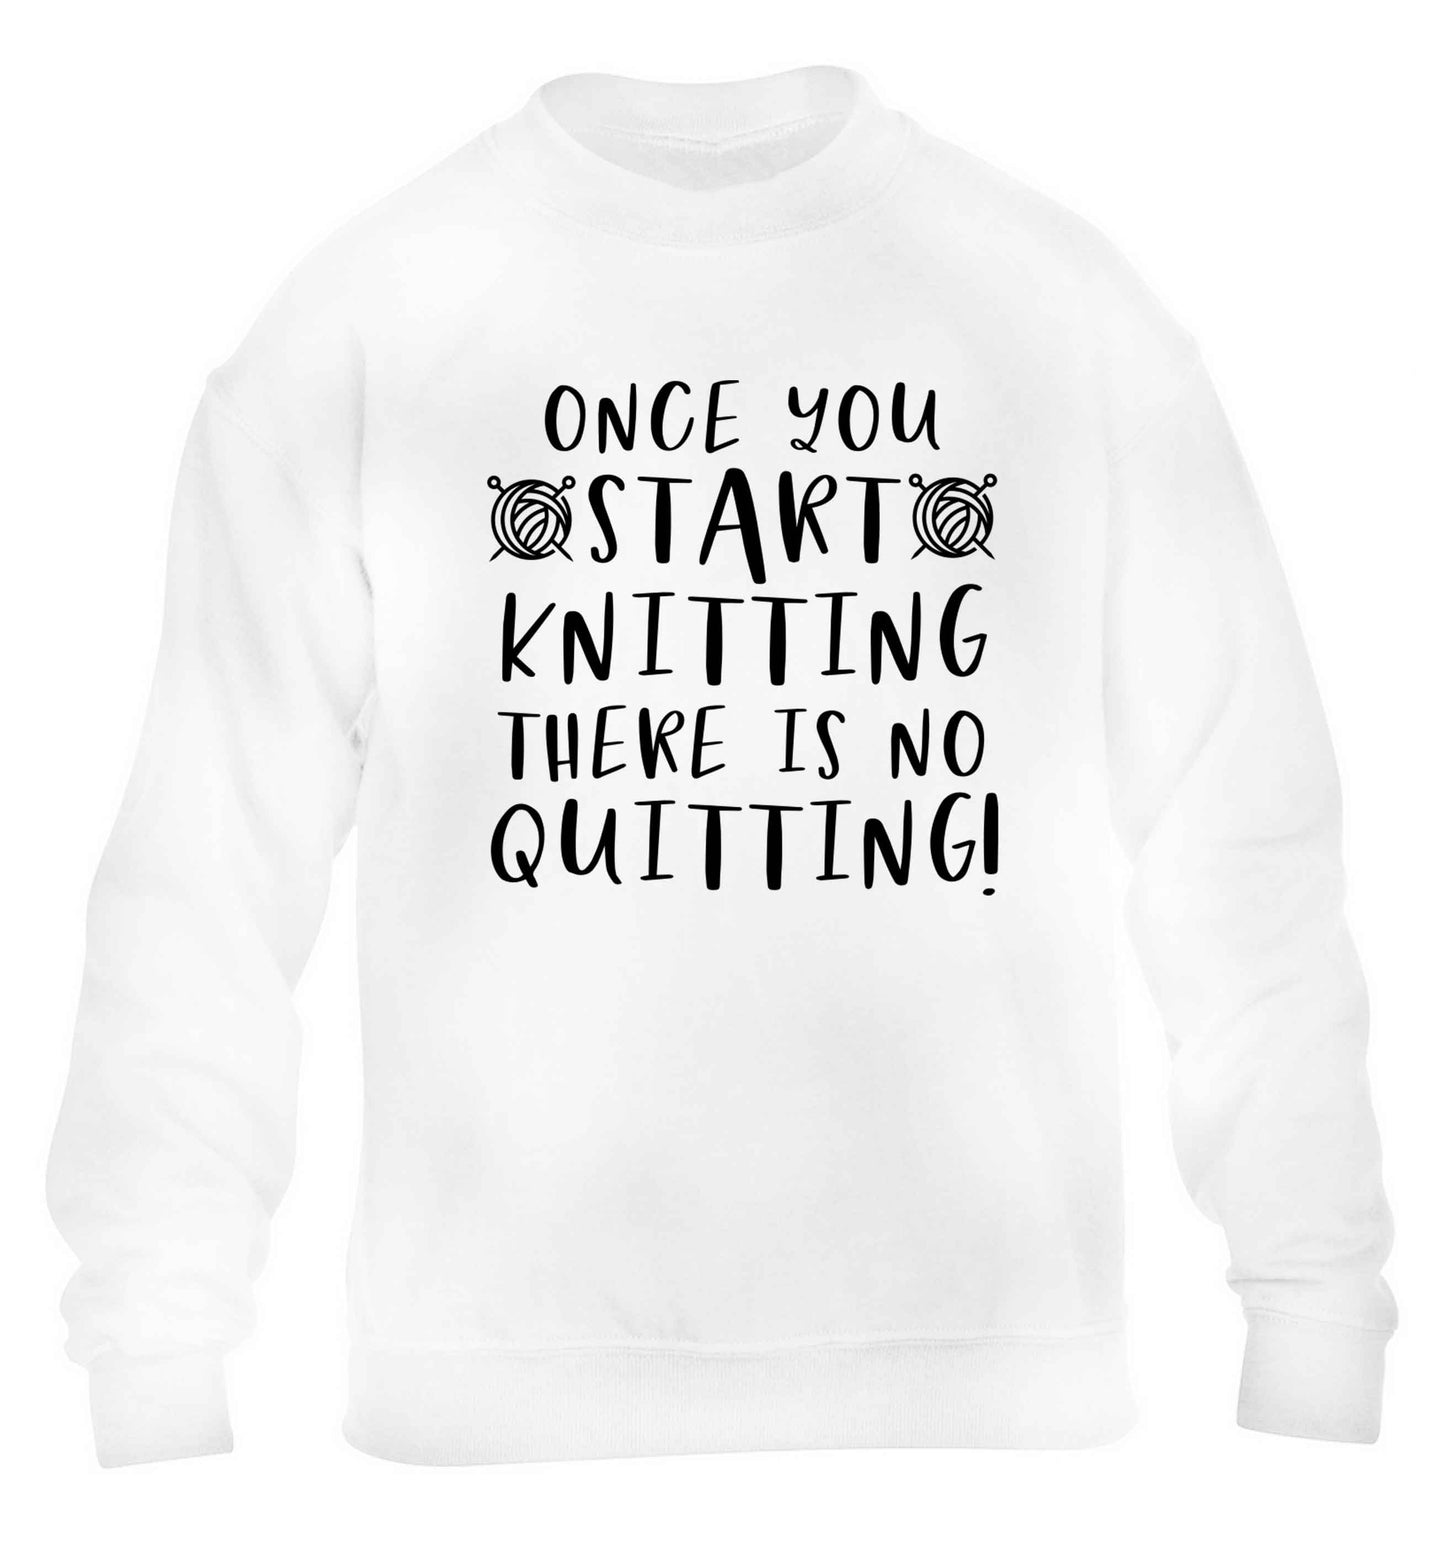 Once you start knitting there is no quitting! children's white sweater 12-13 Years